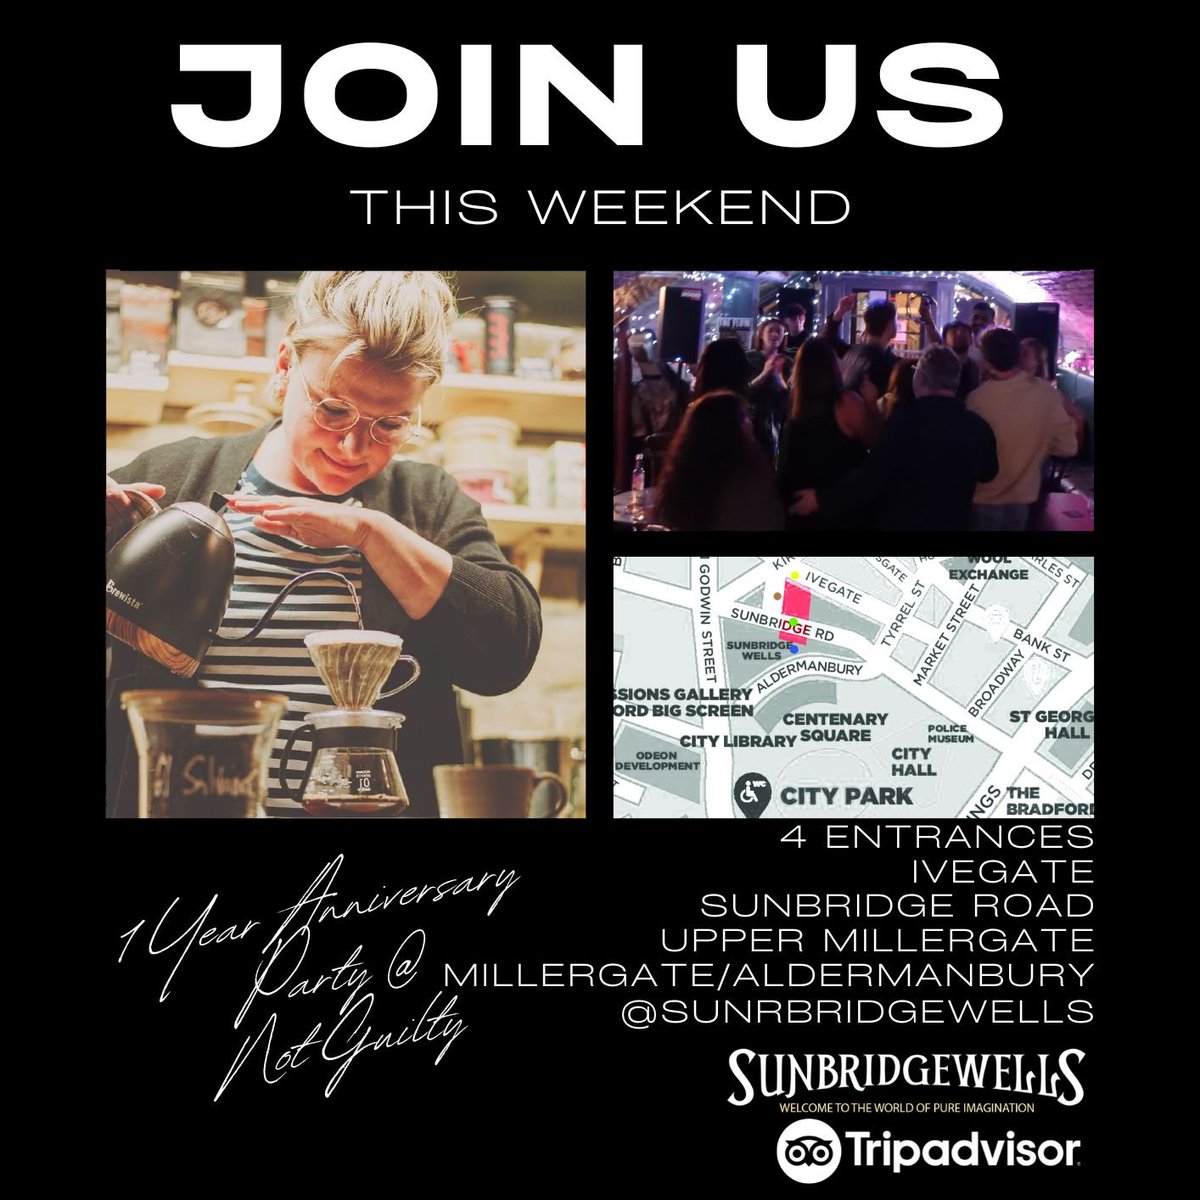 What's on this weekend at Sunbridge Wells

Friday - Live Music with Andy James at Wallers Brewery

Saturday - We celebrate the 1 Year Anniversary of Not Guilty at Sunbridge Wells with DJ Lud playing until 2am!

#Bradford #WestYorkshire #Yorkshire #Tunnels #Cityofculture2025